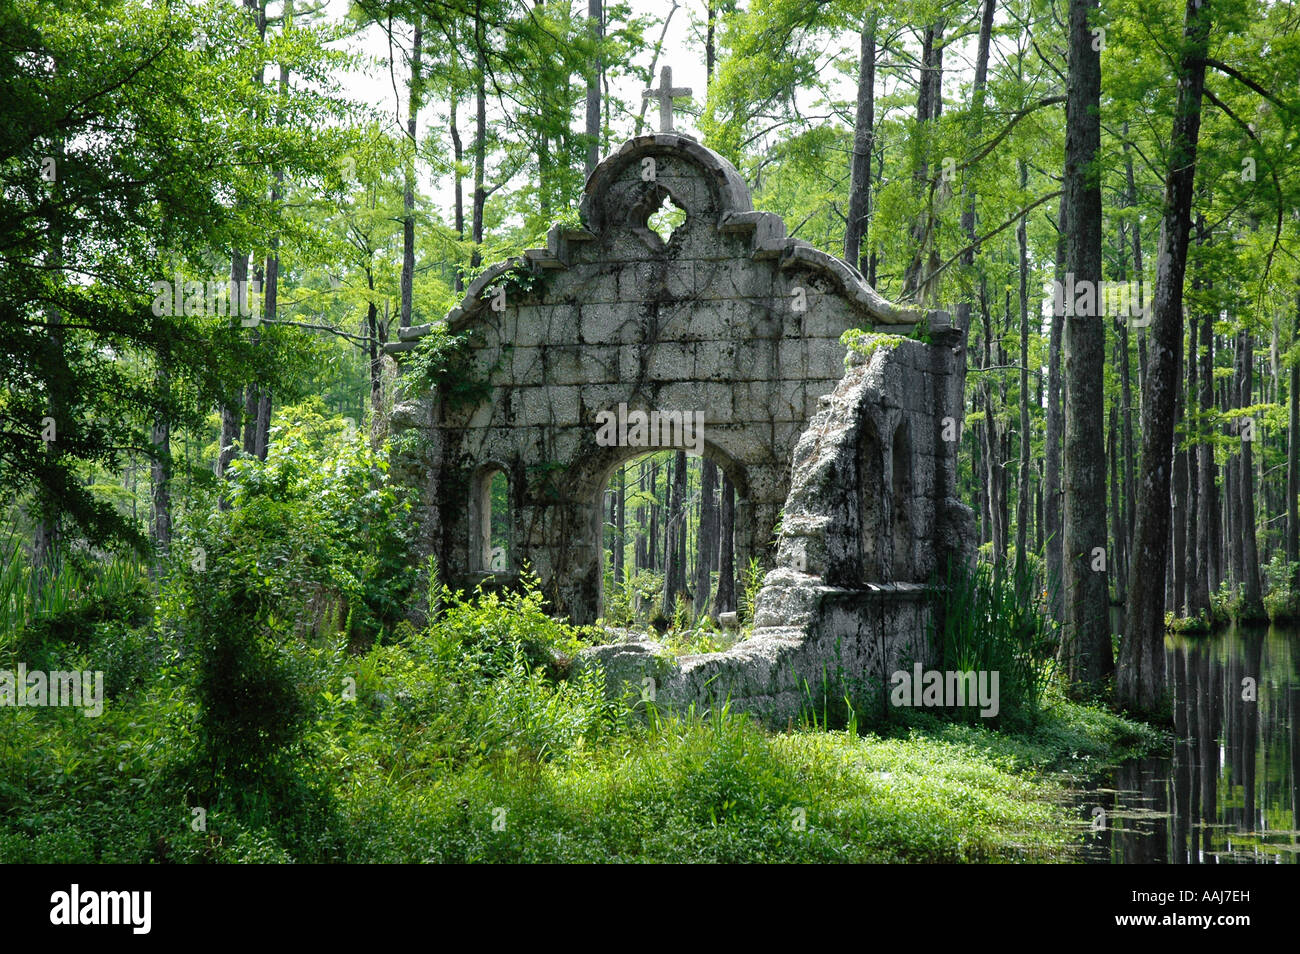 mission ruins from movie The Patriot,at Cypress Gardens Moncks Corner SC Stock Photo